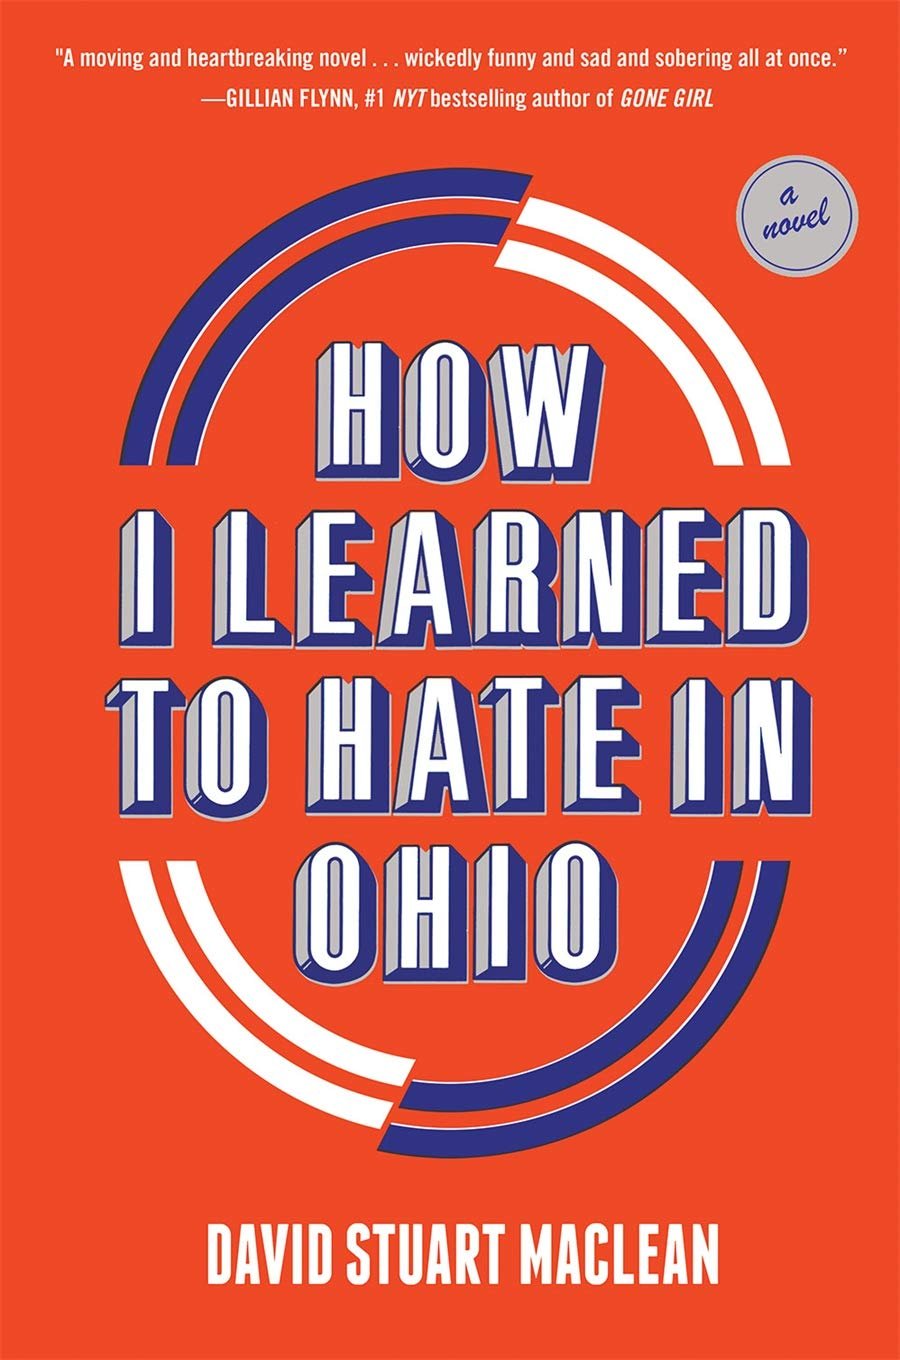 how I learned to hate in ohio.jpg